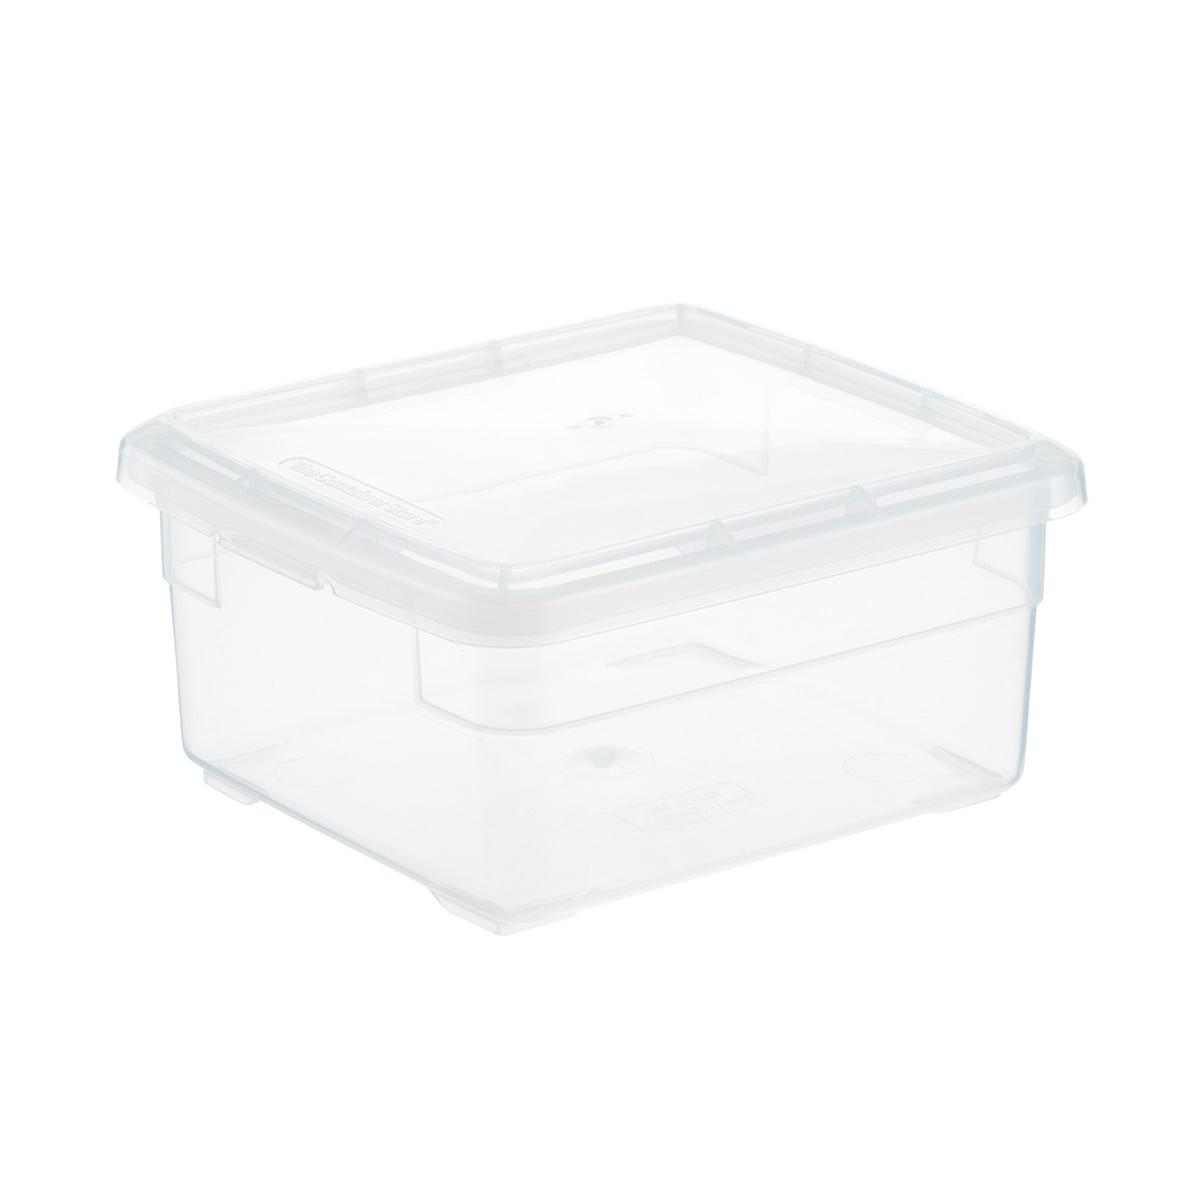 Our Clear Storage Boxes The Container, Clear Storage Boxes Small